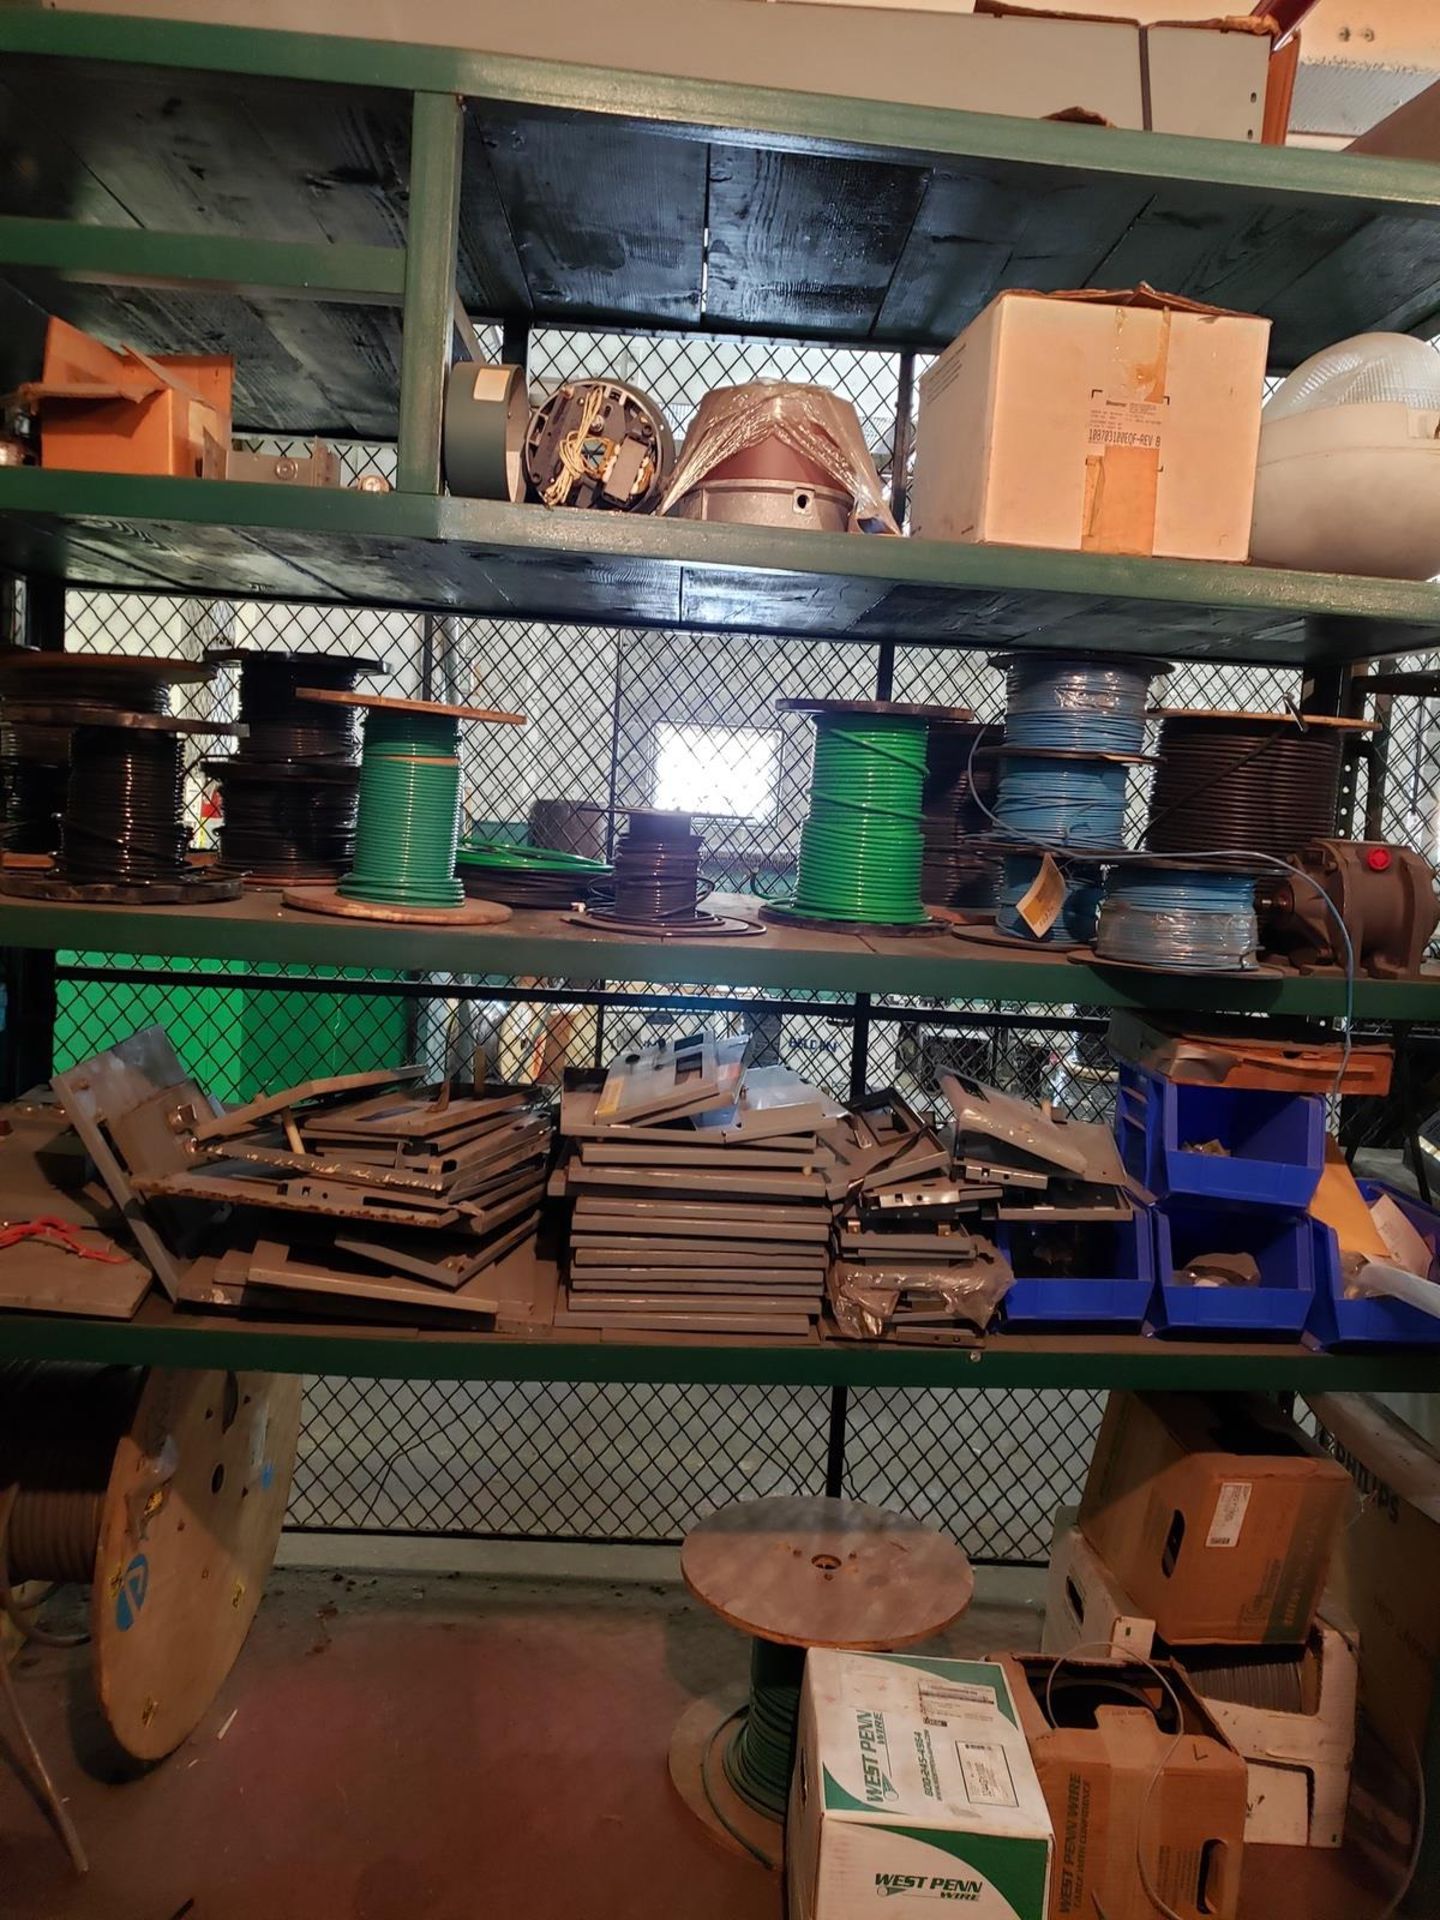 Contents of Spare Parts Storage Cage | Rig Fee $7500 - Image 2 of 20